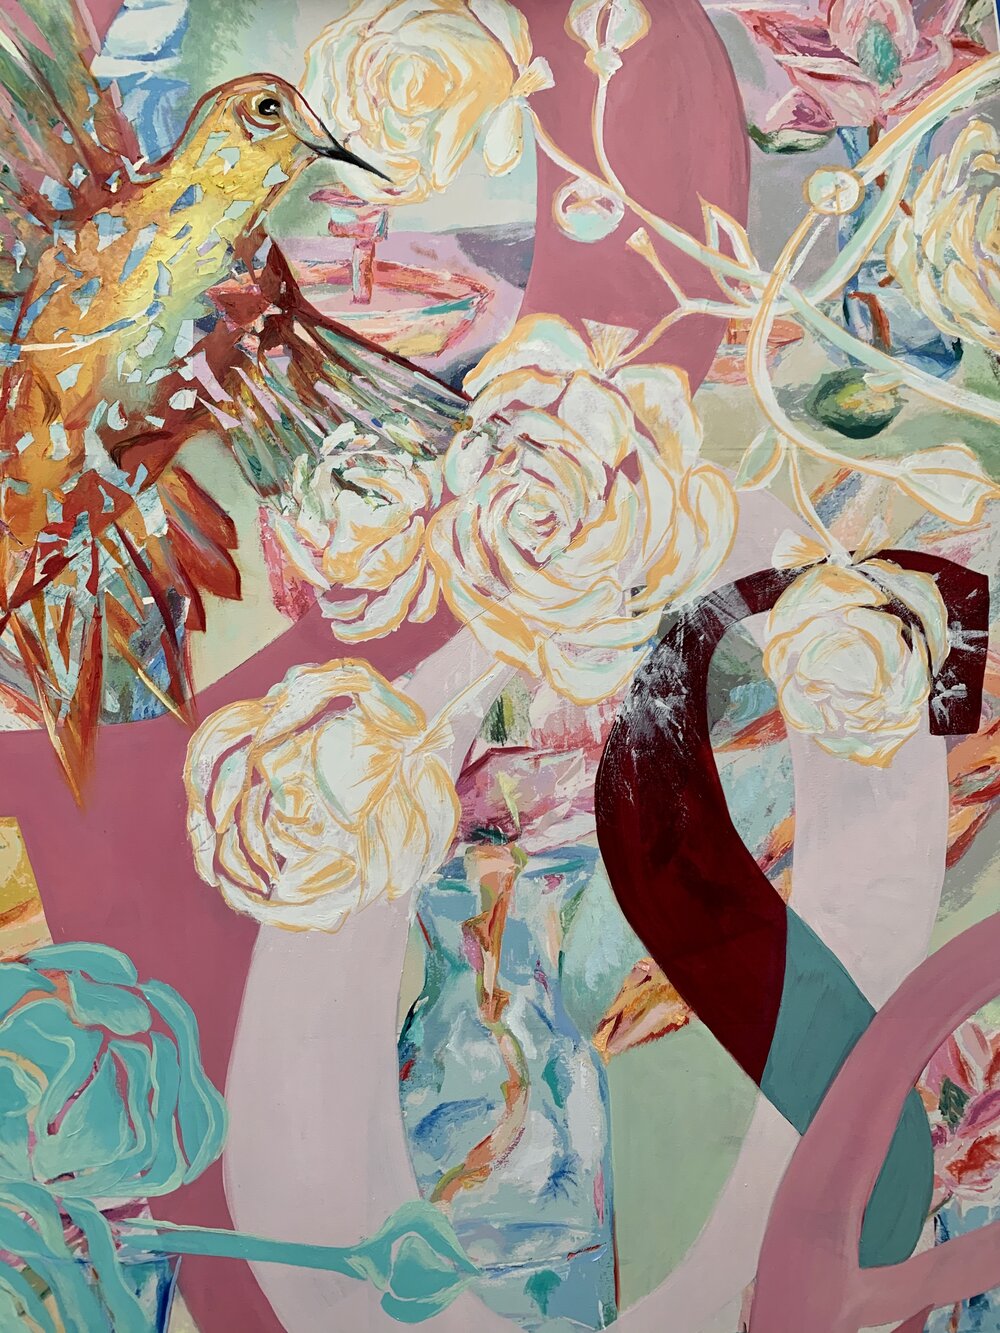 Image credit: Maggie Grundy, detail shots of paintings exhibiting at START Gallery for ‘3 x 4 x 7’